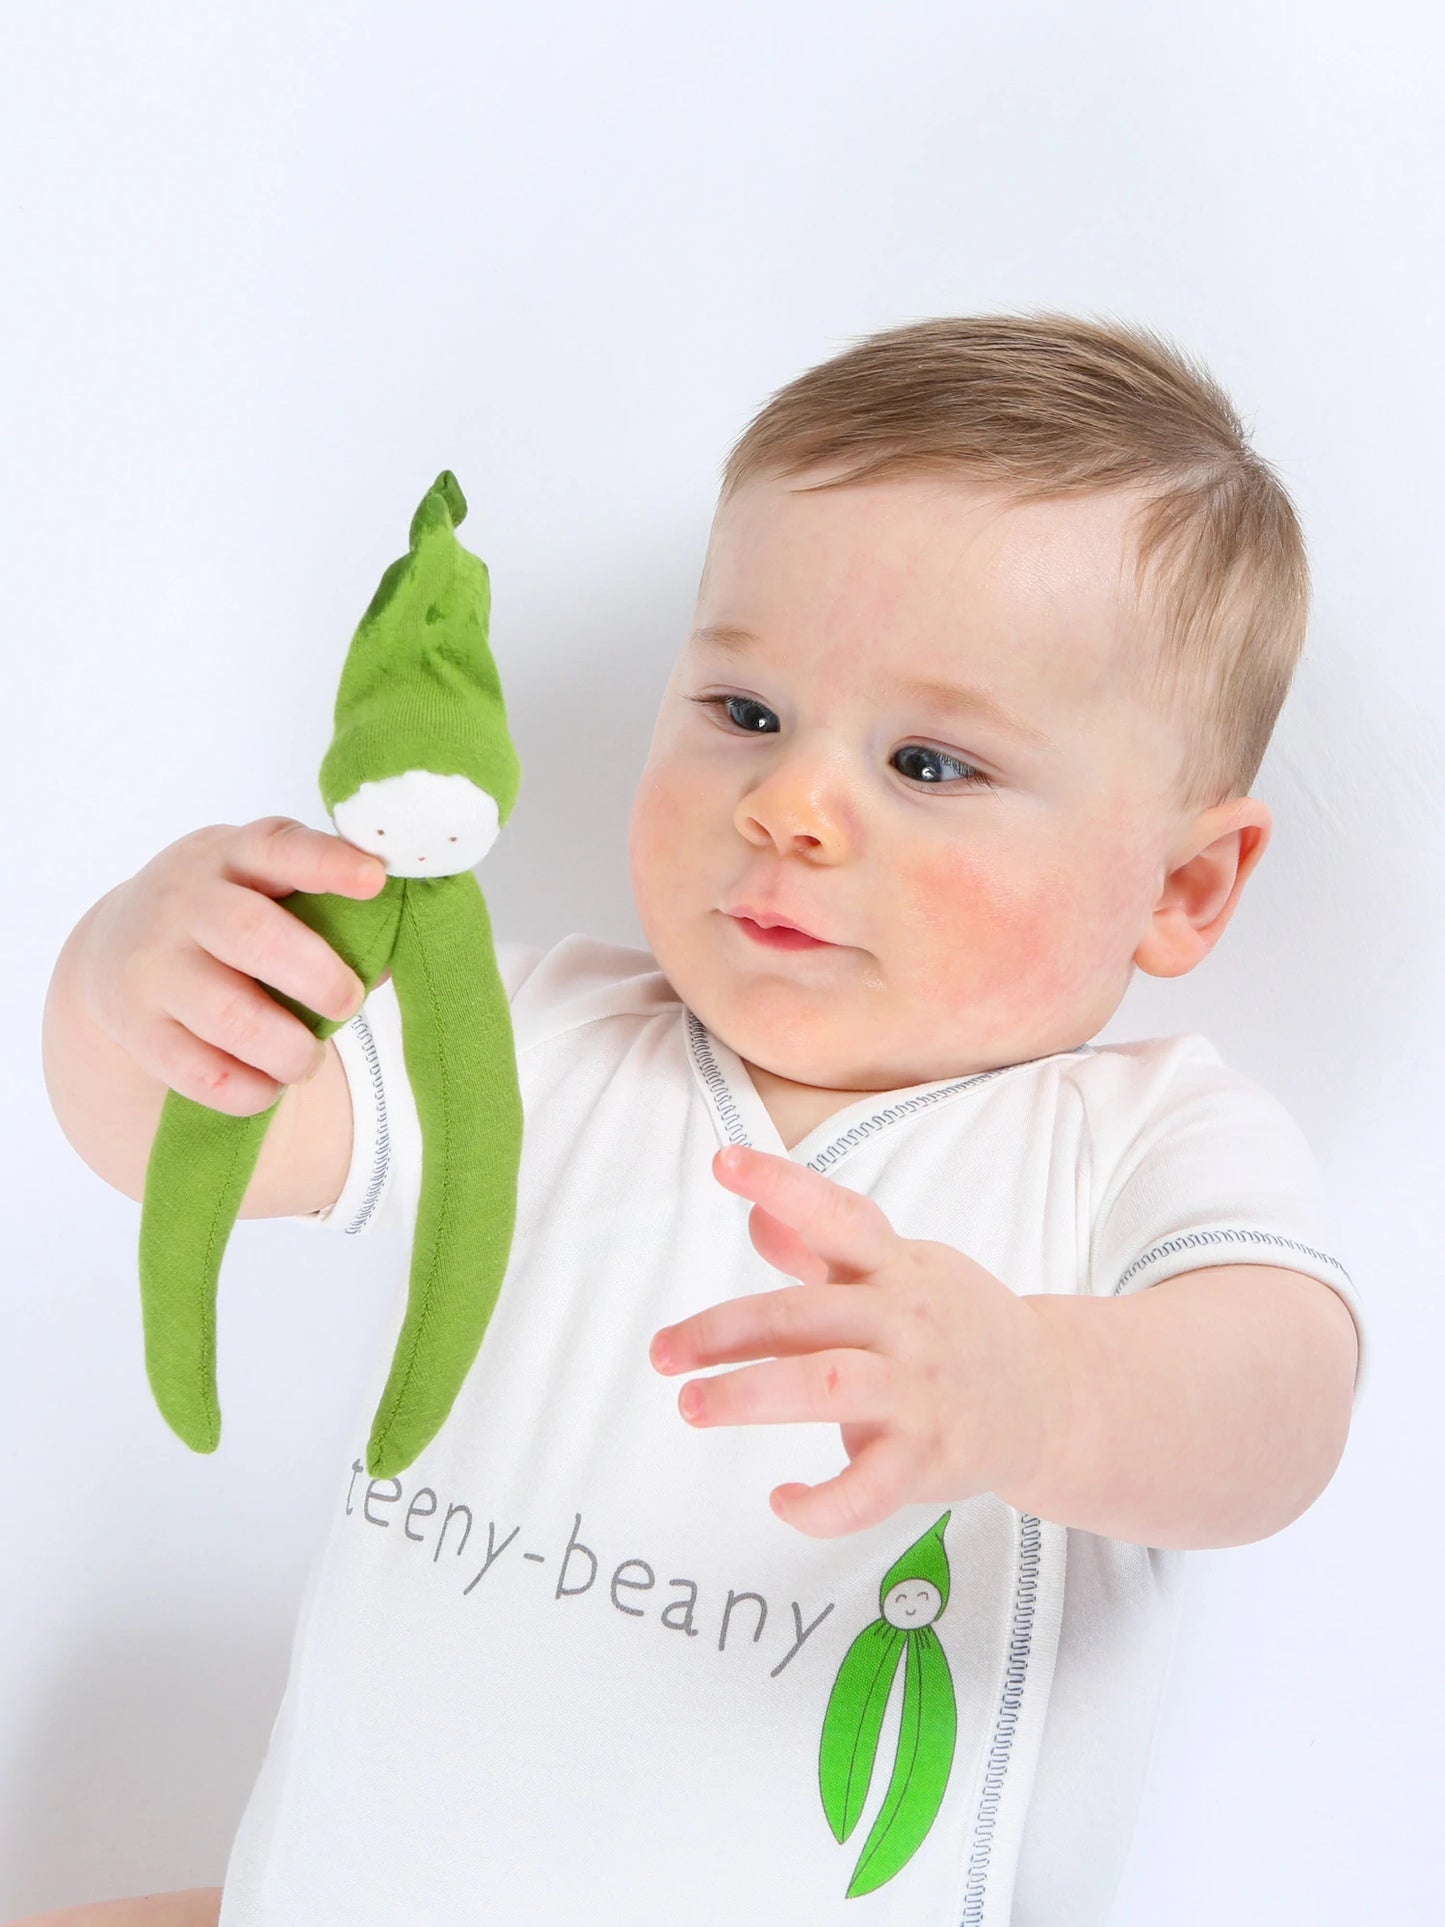 Baby holding an Organic green beans toy